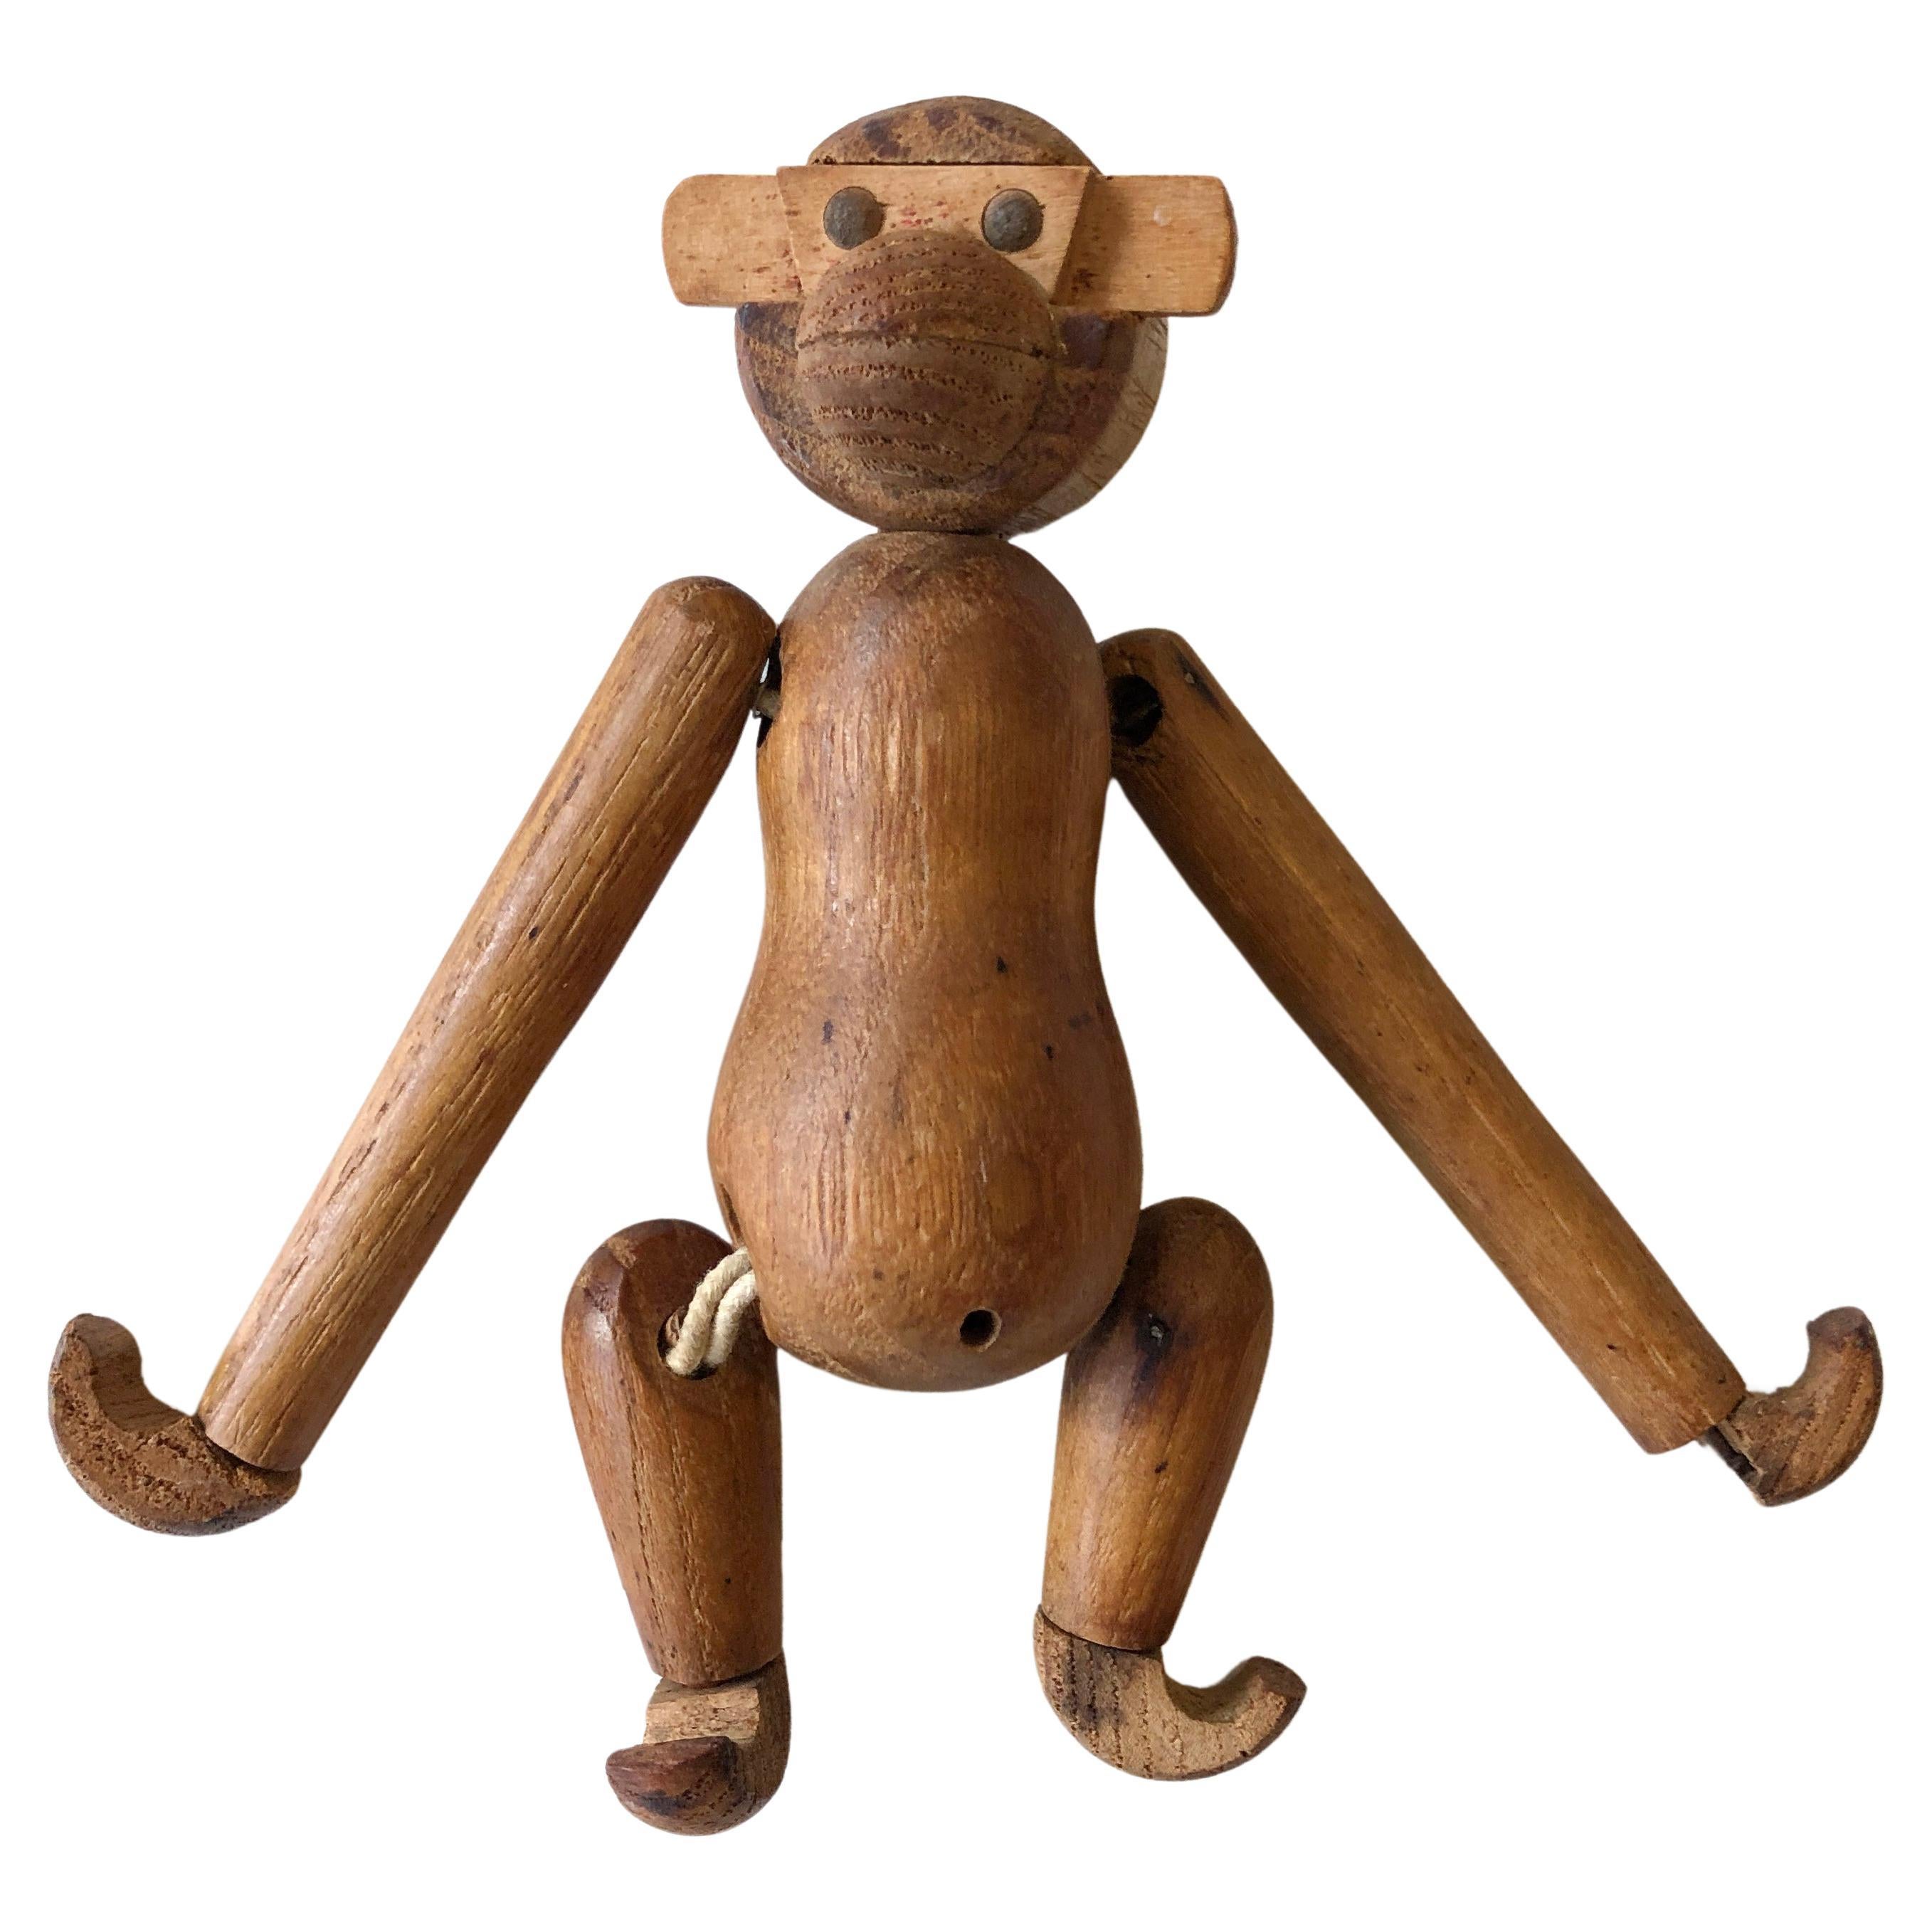 Vintage 1950's small wooden monkey - Kay Bojesen style For Sale